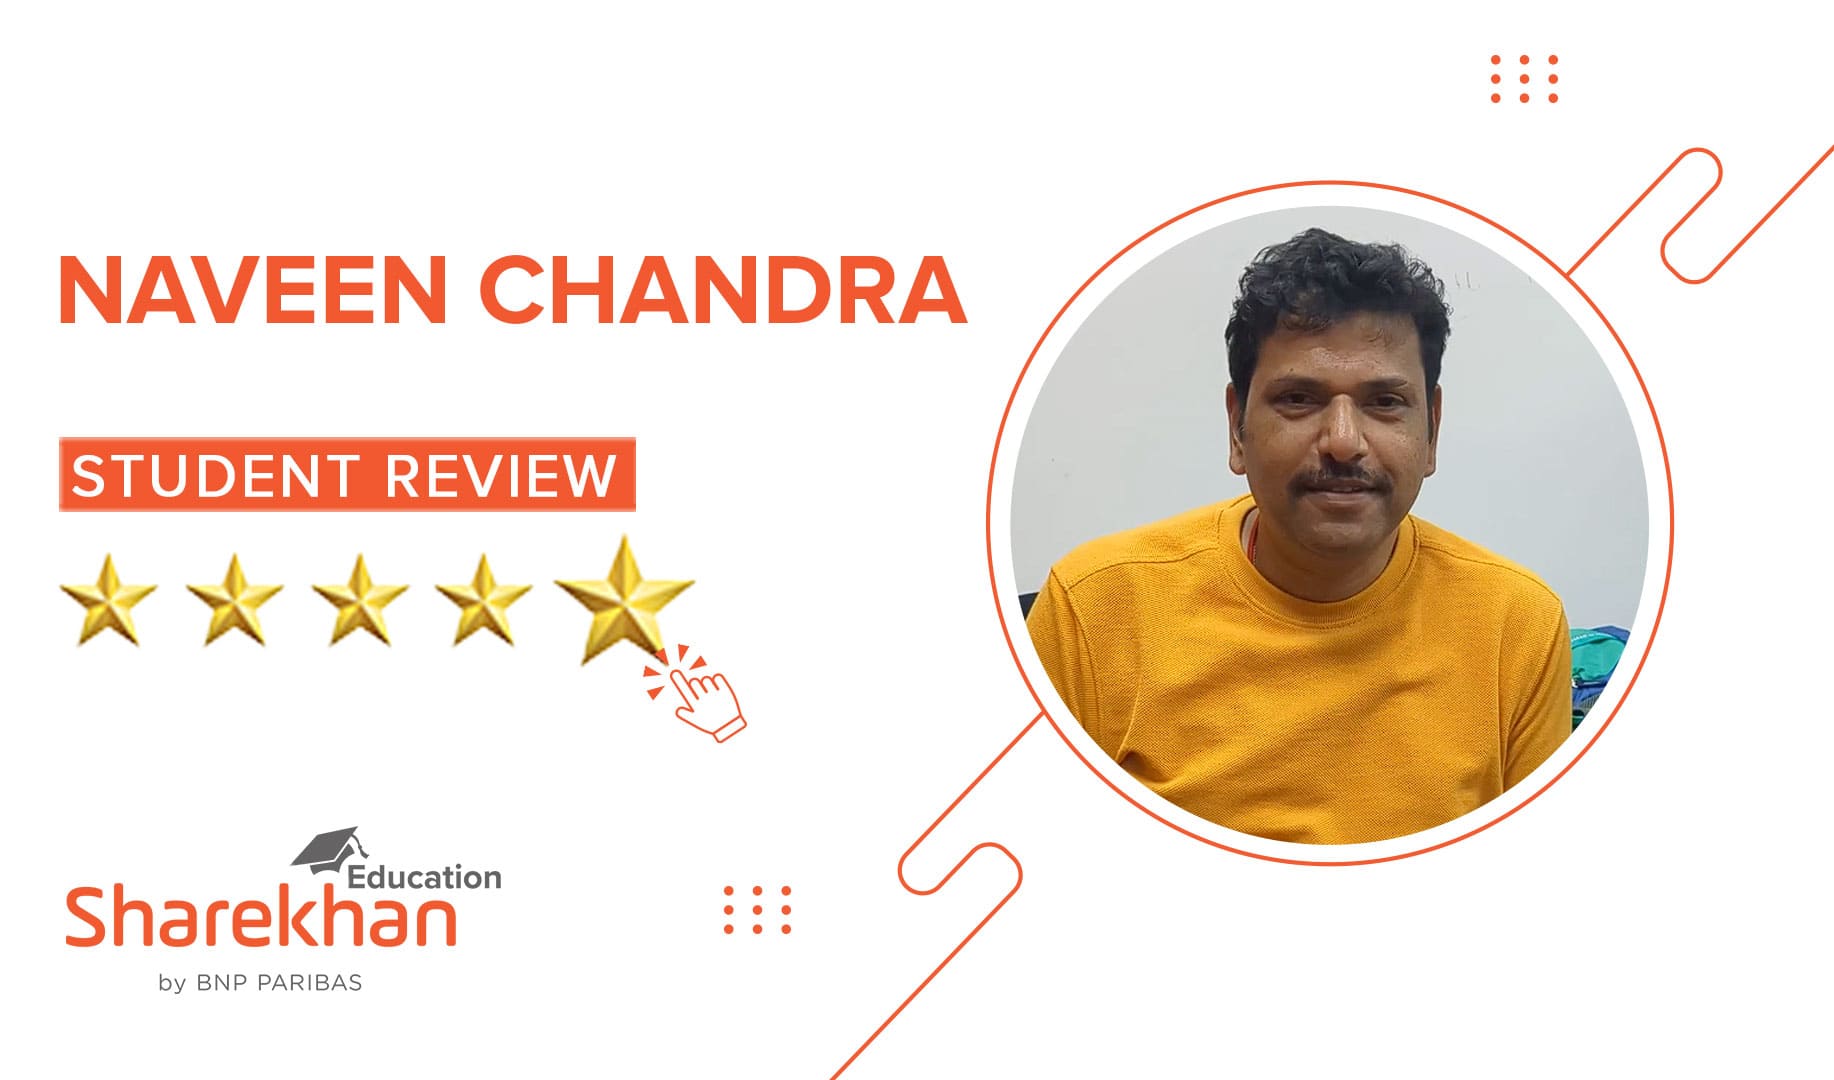 Sharekhan Education Review by Naveen Chandra